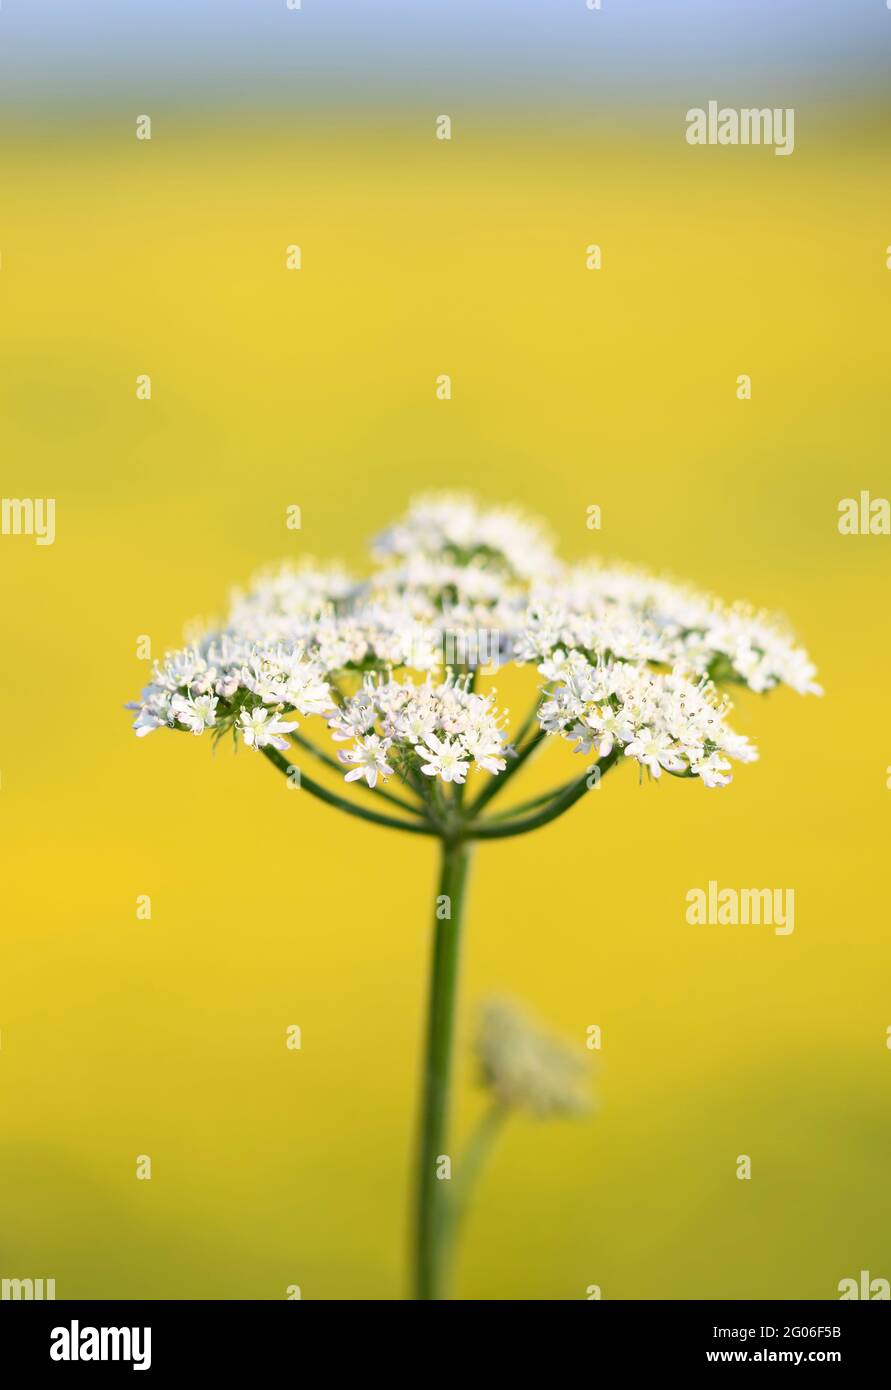 A flower head of Cow Parsley (Anthriscus sylvestris), photographed against an out of focus field of bright yellow buttercups. Stock Photo